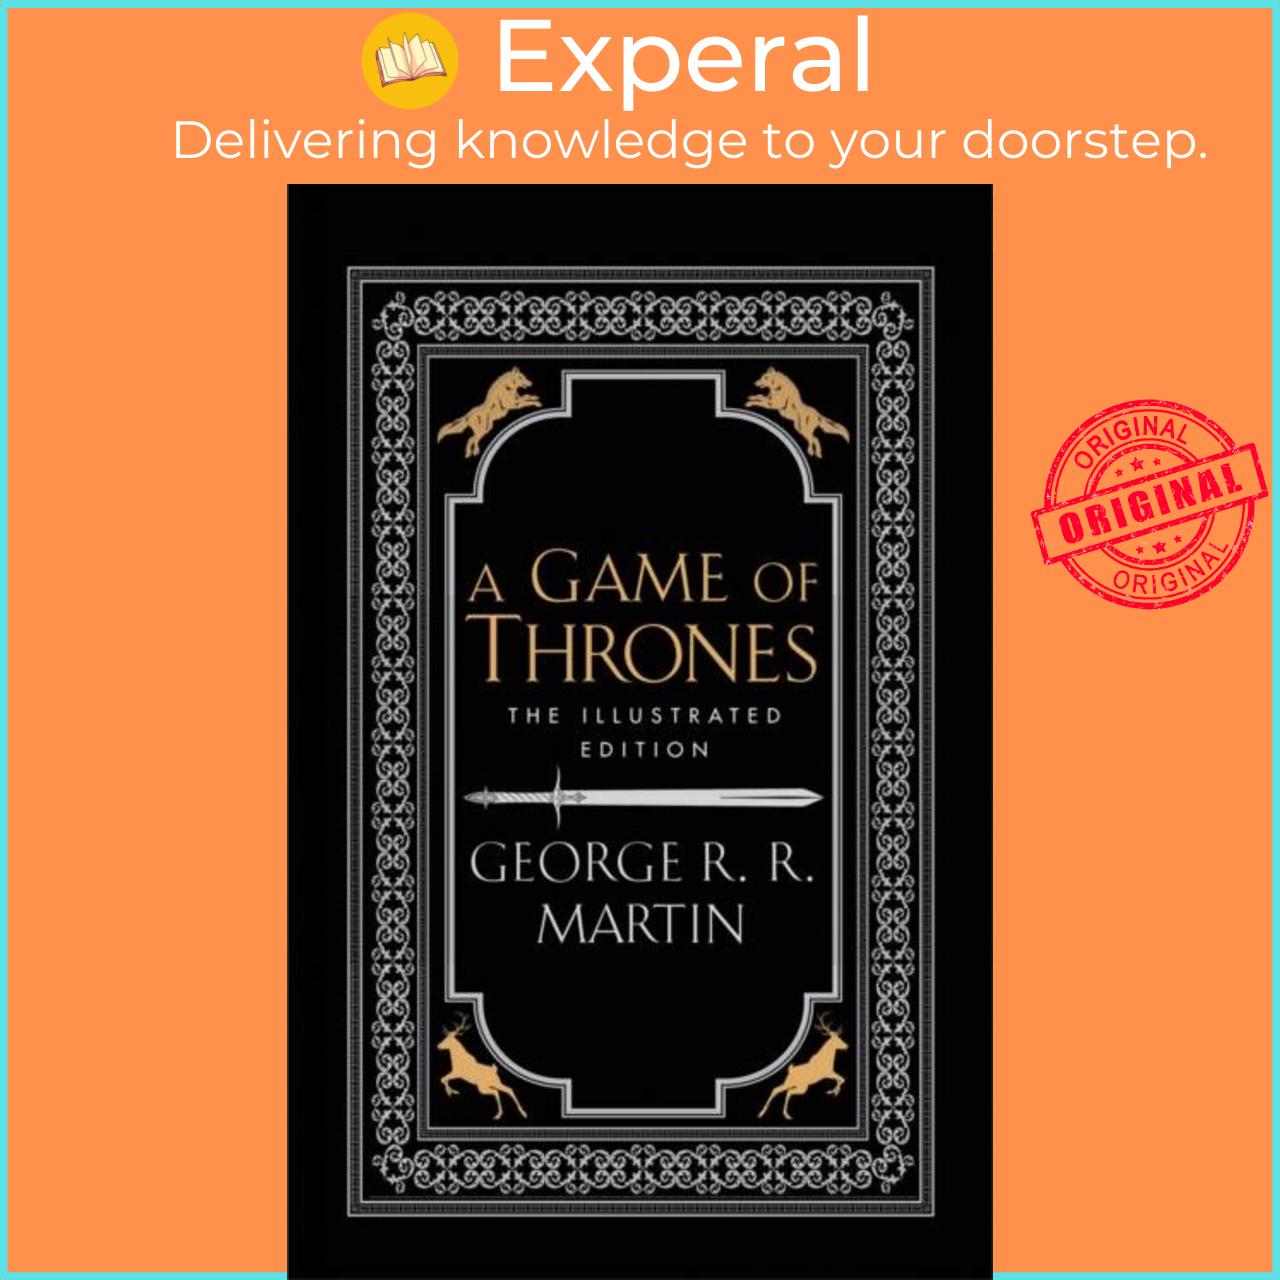 Sách - A Game of Thrones by George R.R. Martin (UK edition, hardcover)